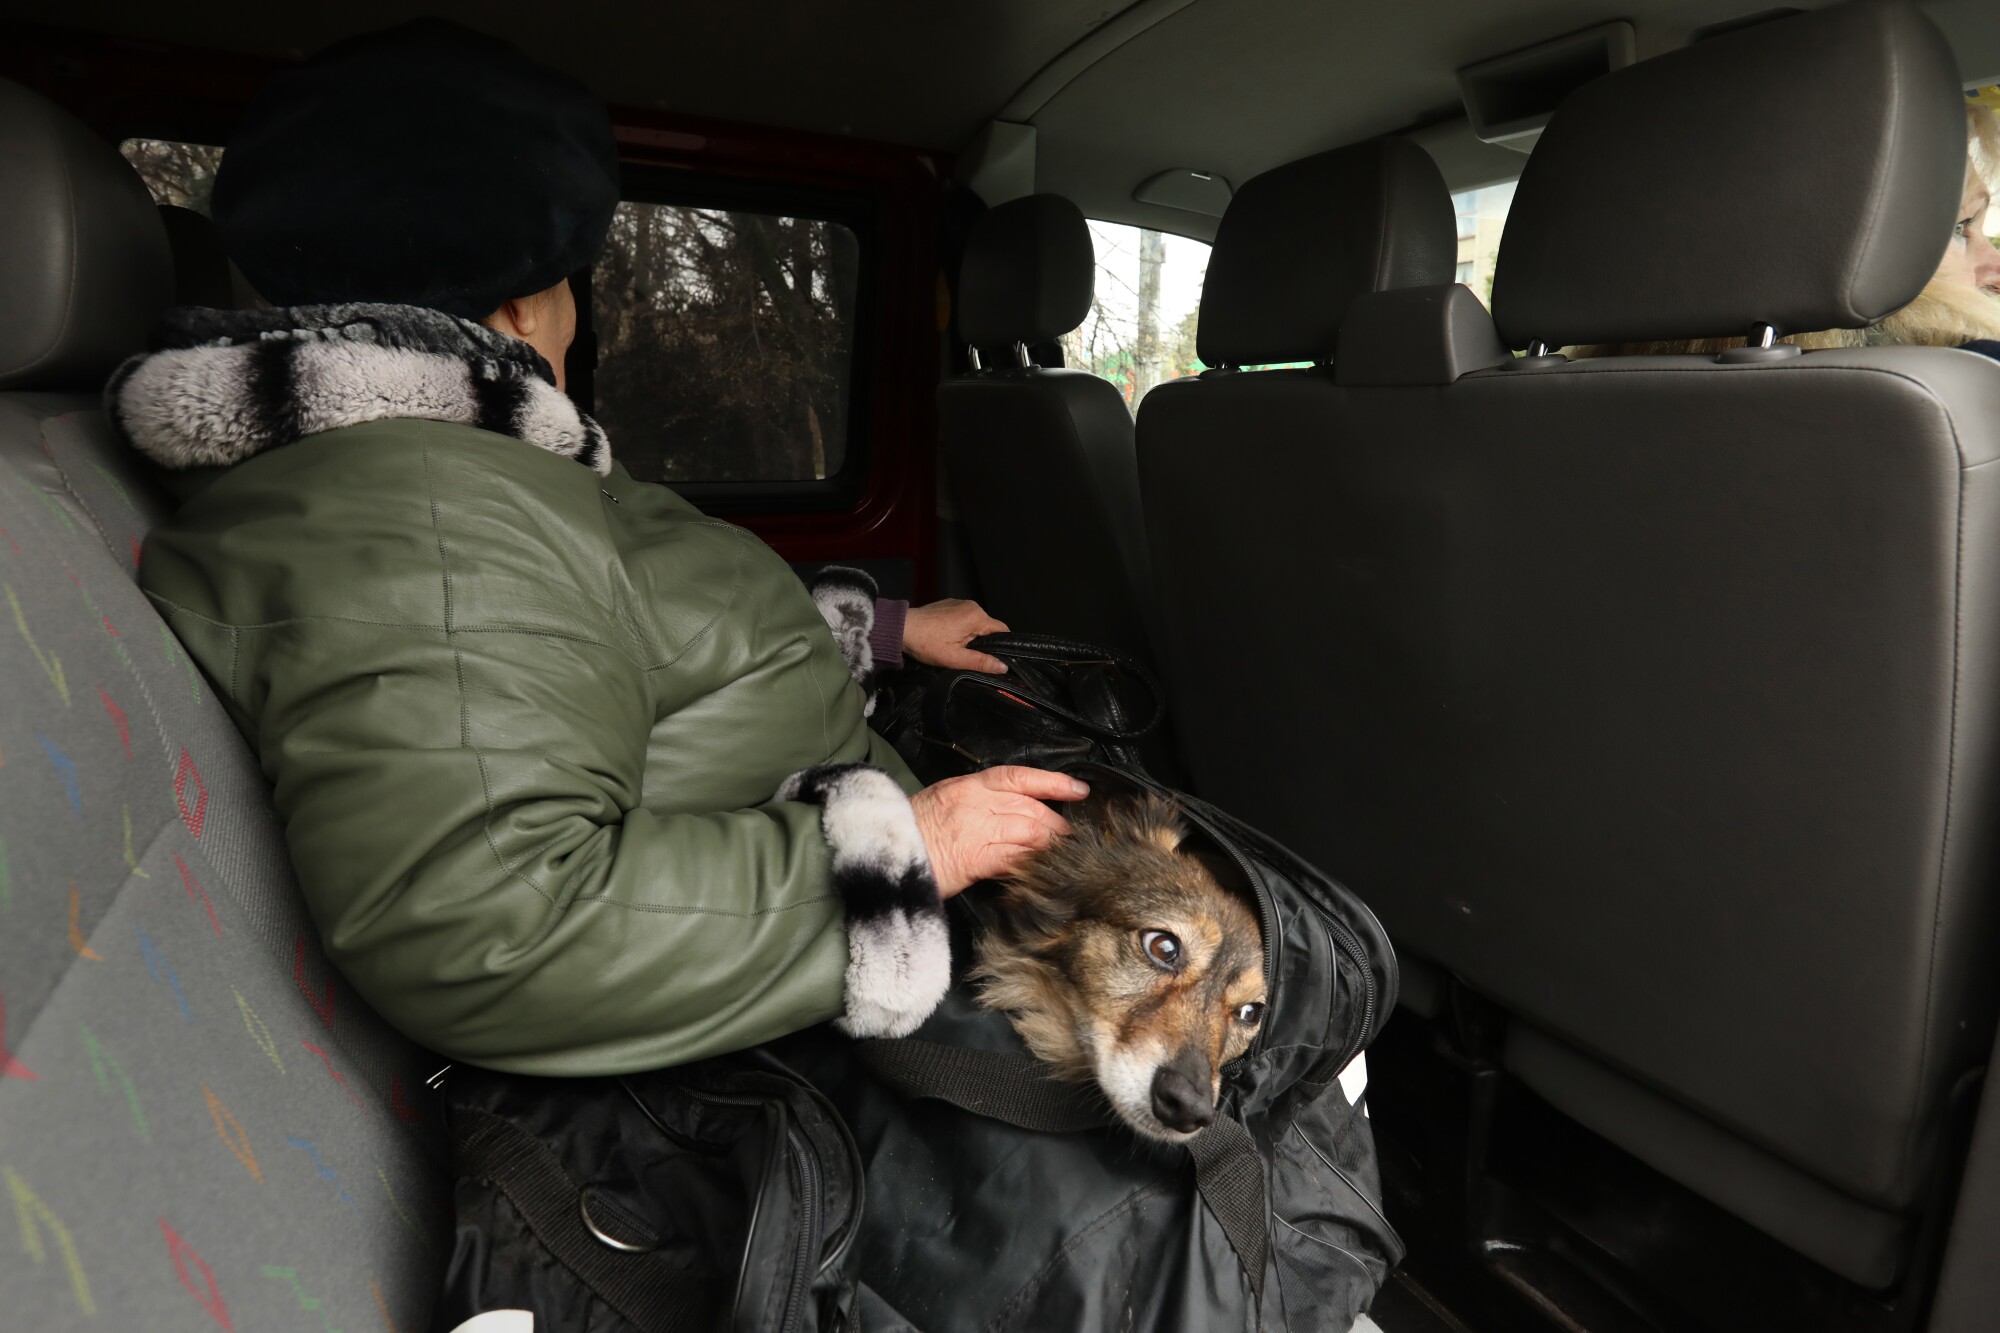 A woman leaves Slavyansk with her dog in a bag.